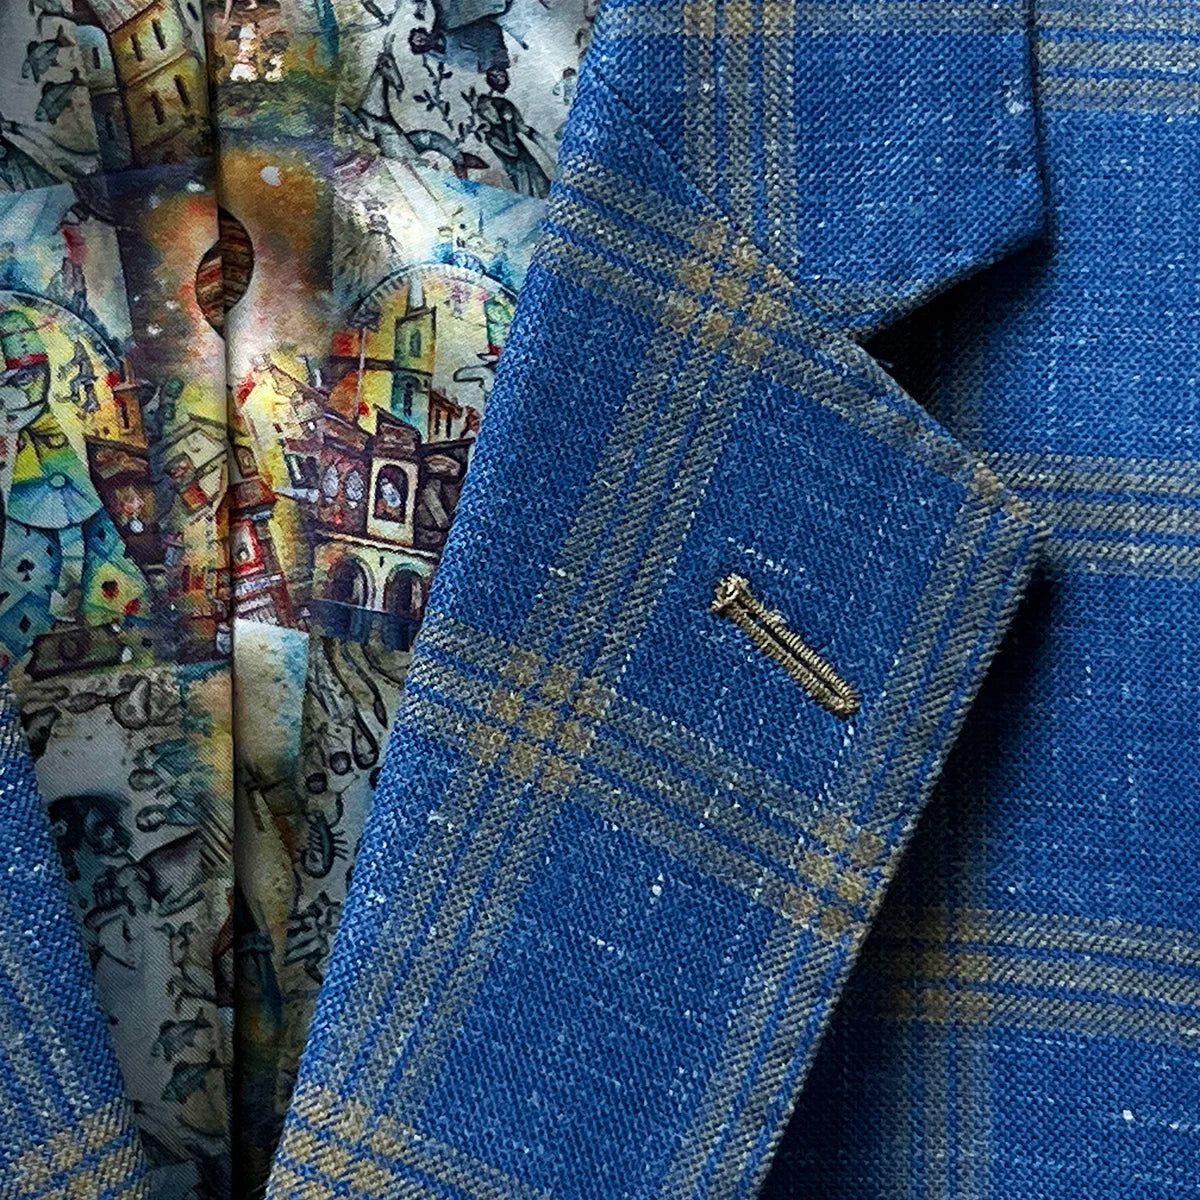 Notch lapel adding a traditional touch to a sky blue with tan windowpane men's sport coat.